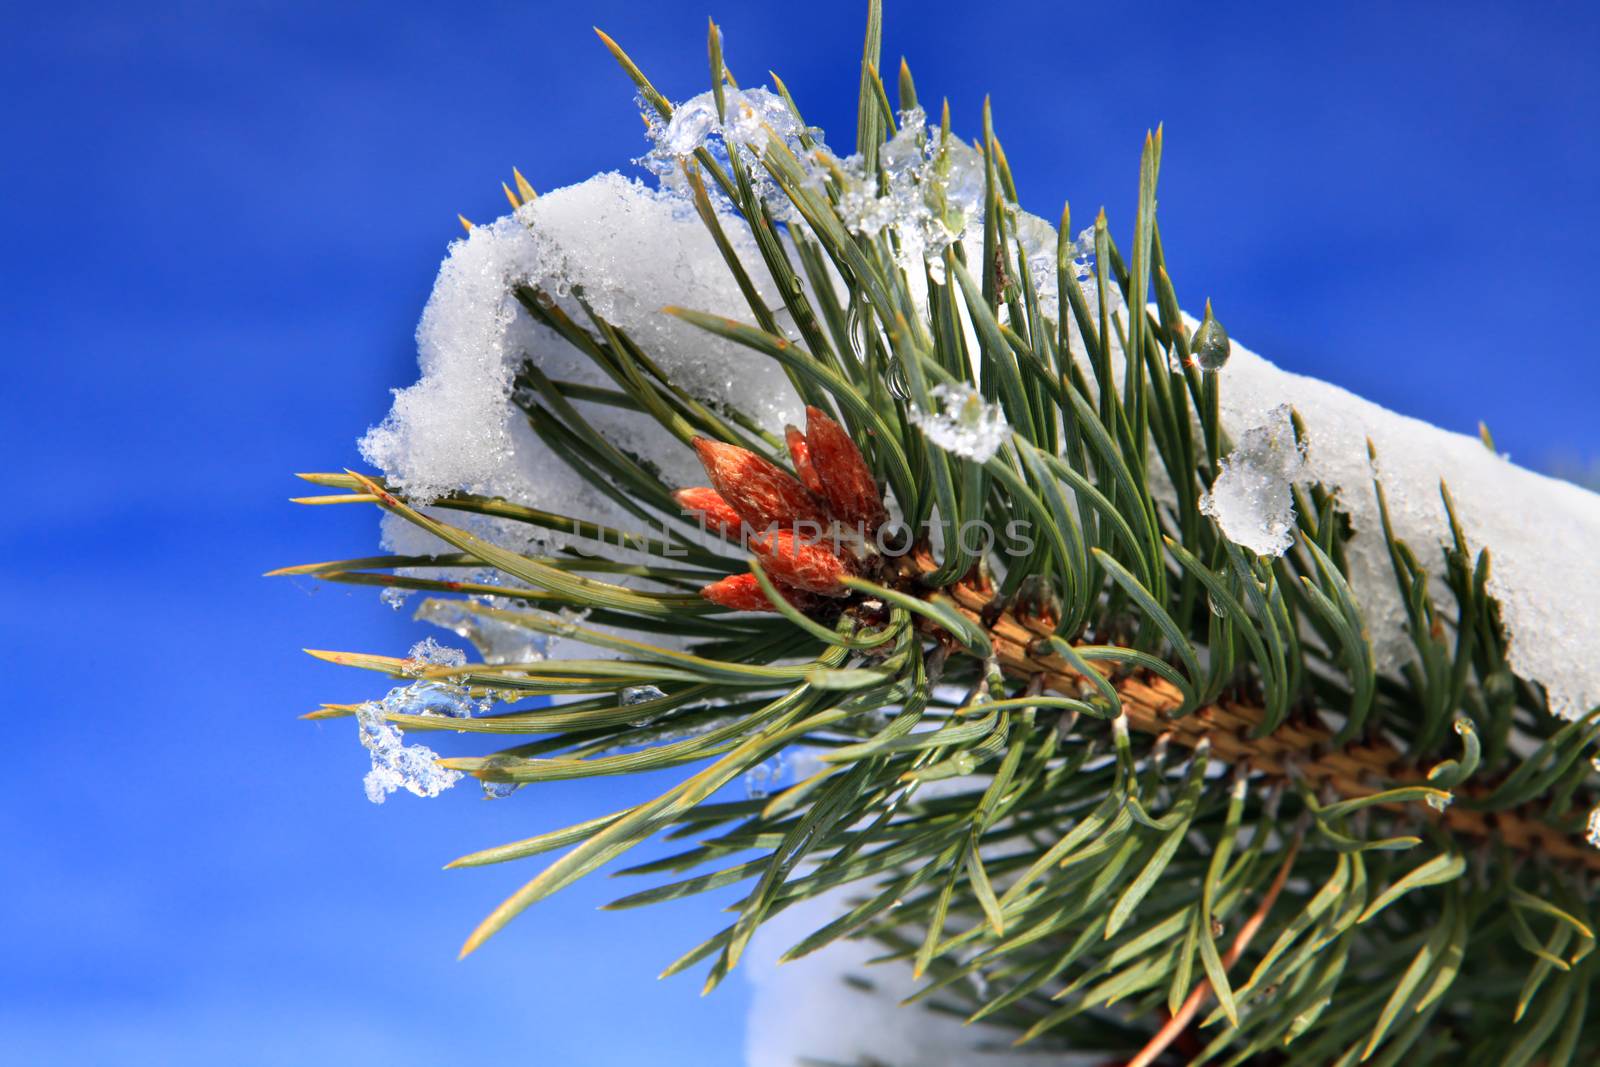 part of fir tree with snow in January by ssuaphoto